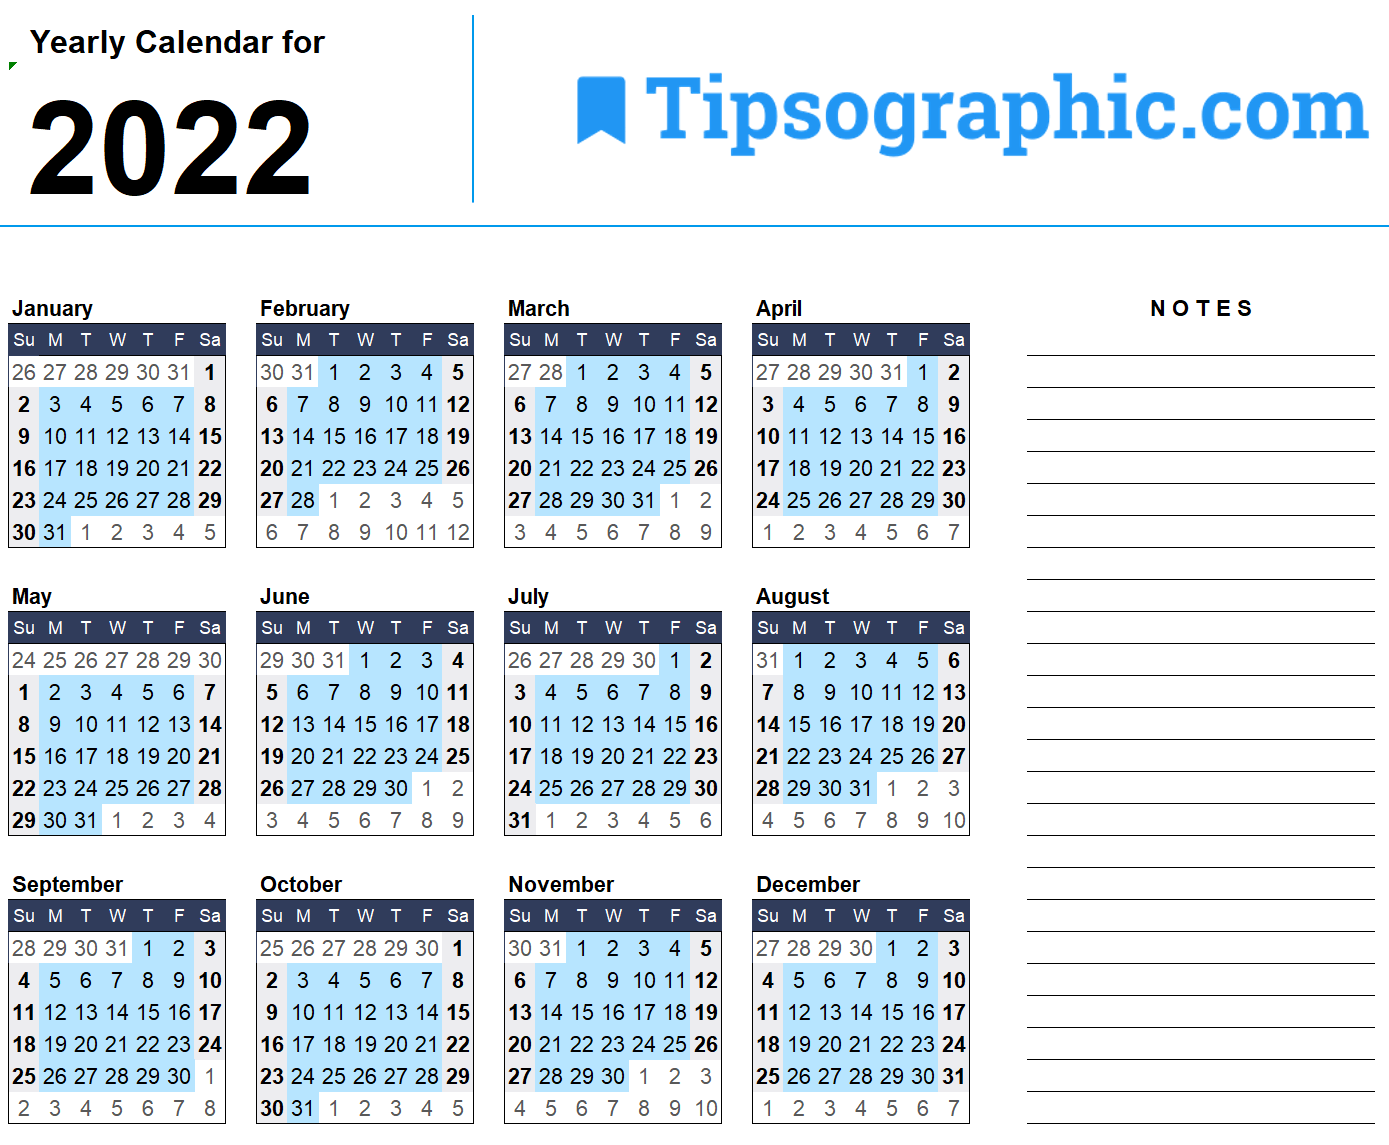 Excel Calendar 2022 Free Download > Download The 2022 Yearly Calendar